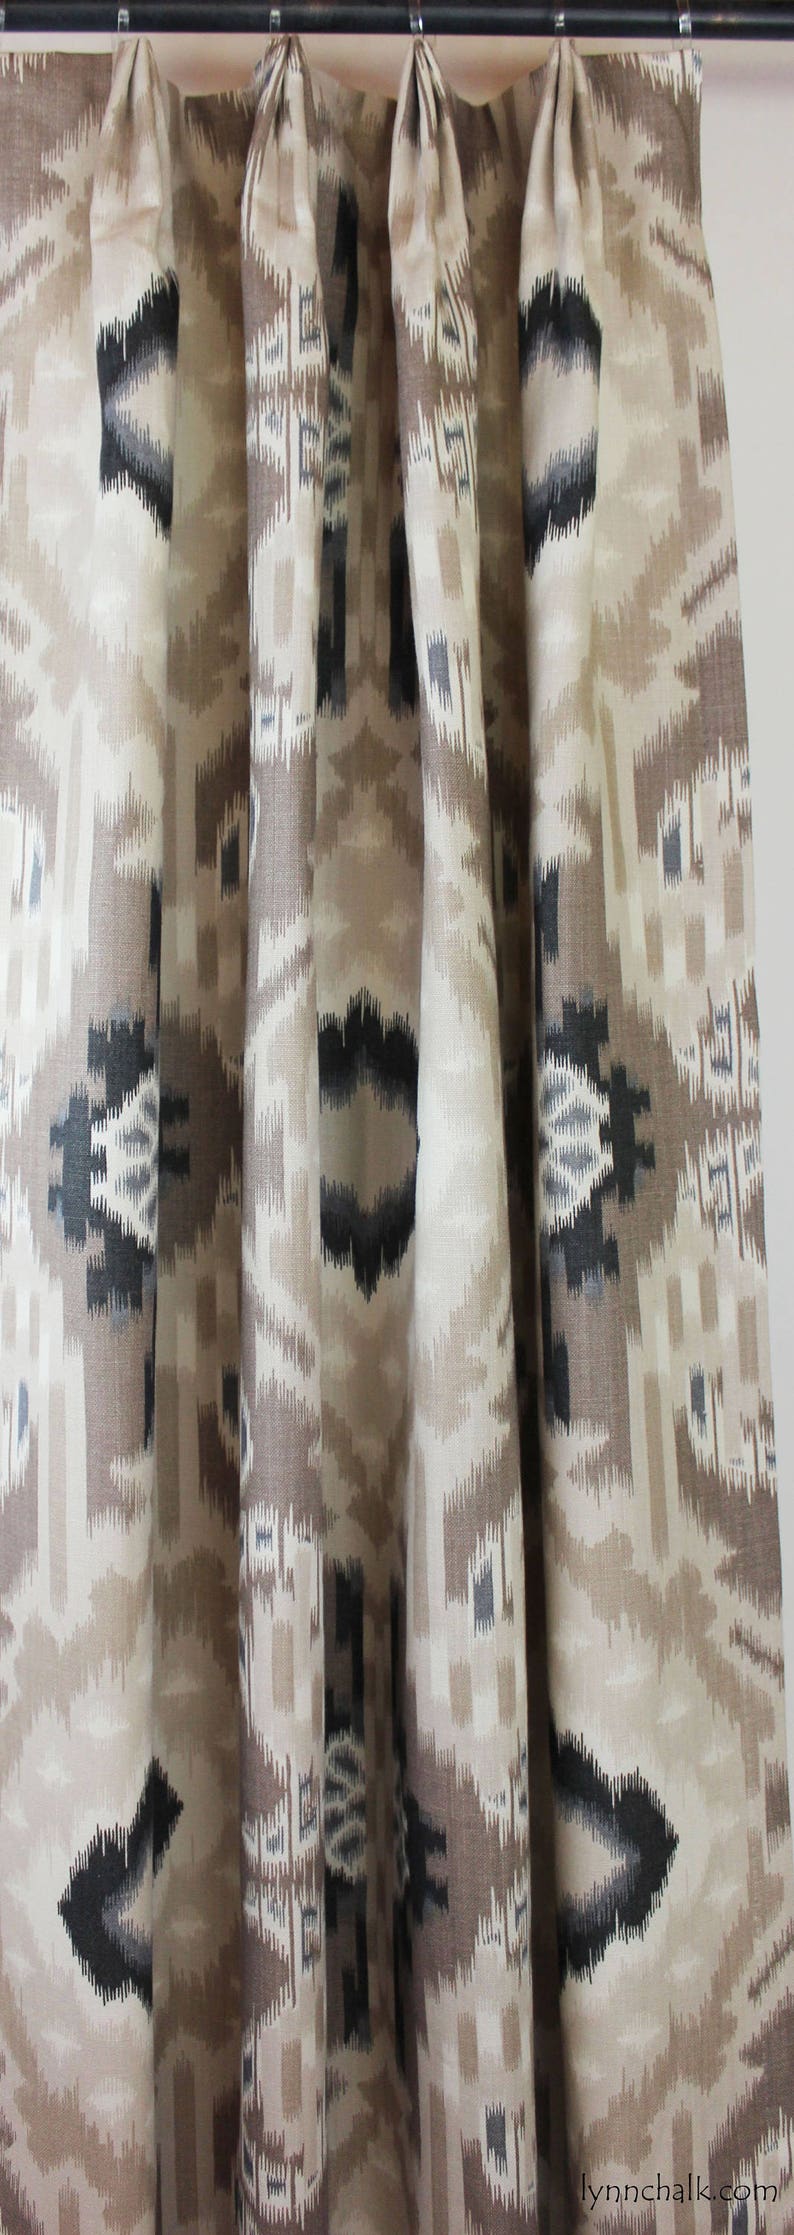 Schumacher Kiribati Ikat Custom Pillows with Welting Shown in Linen - comes in 3 colors